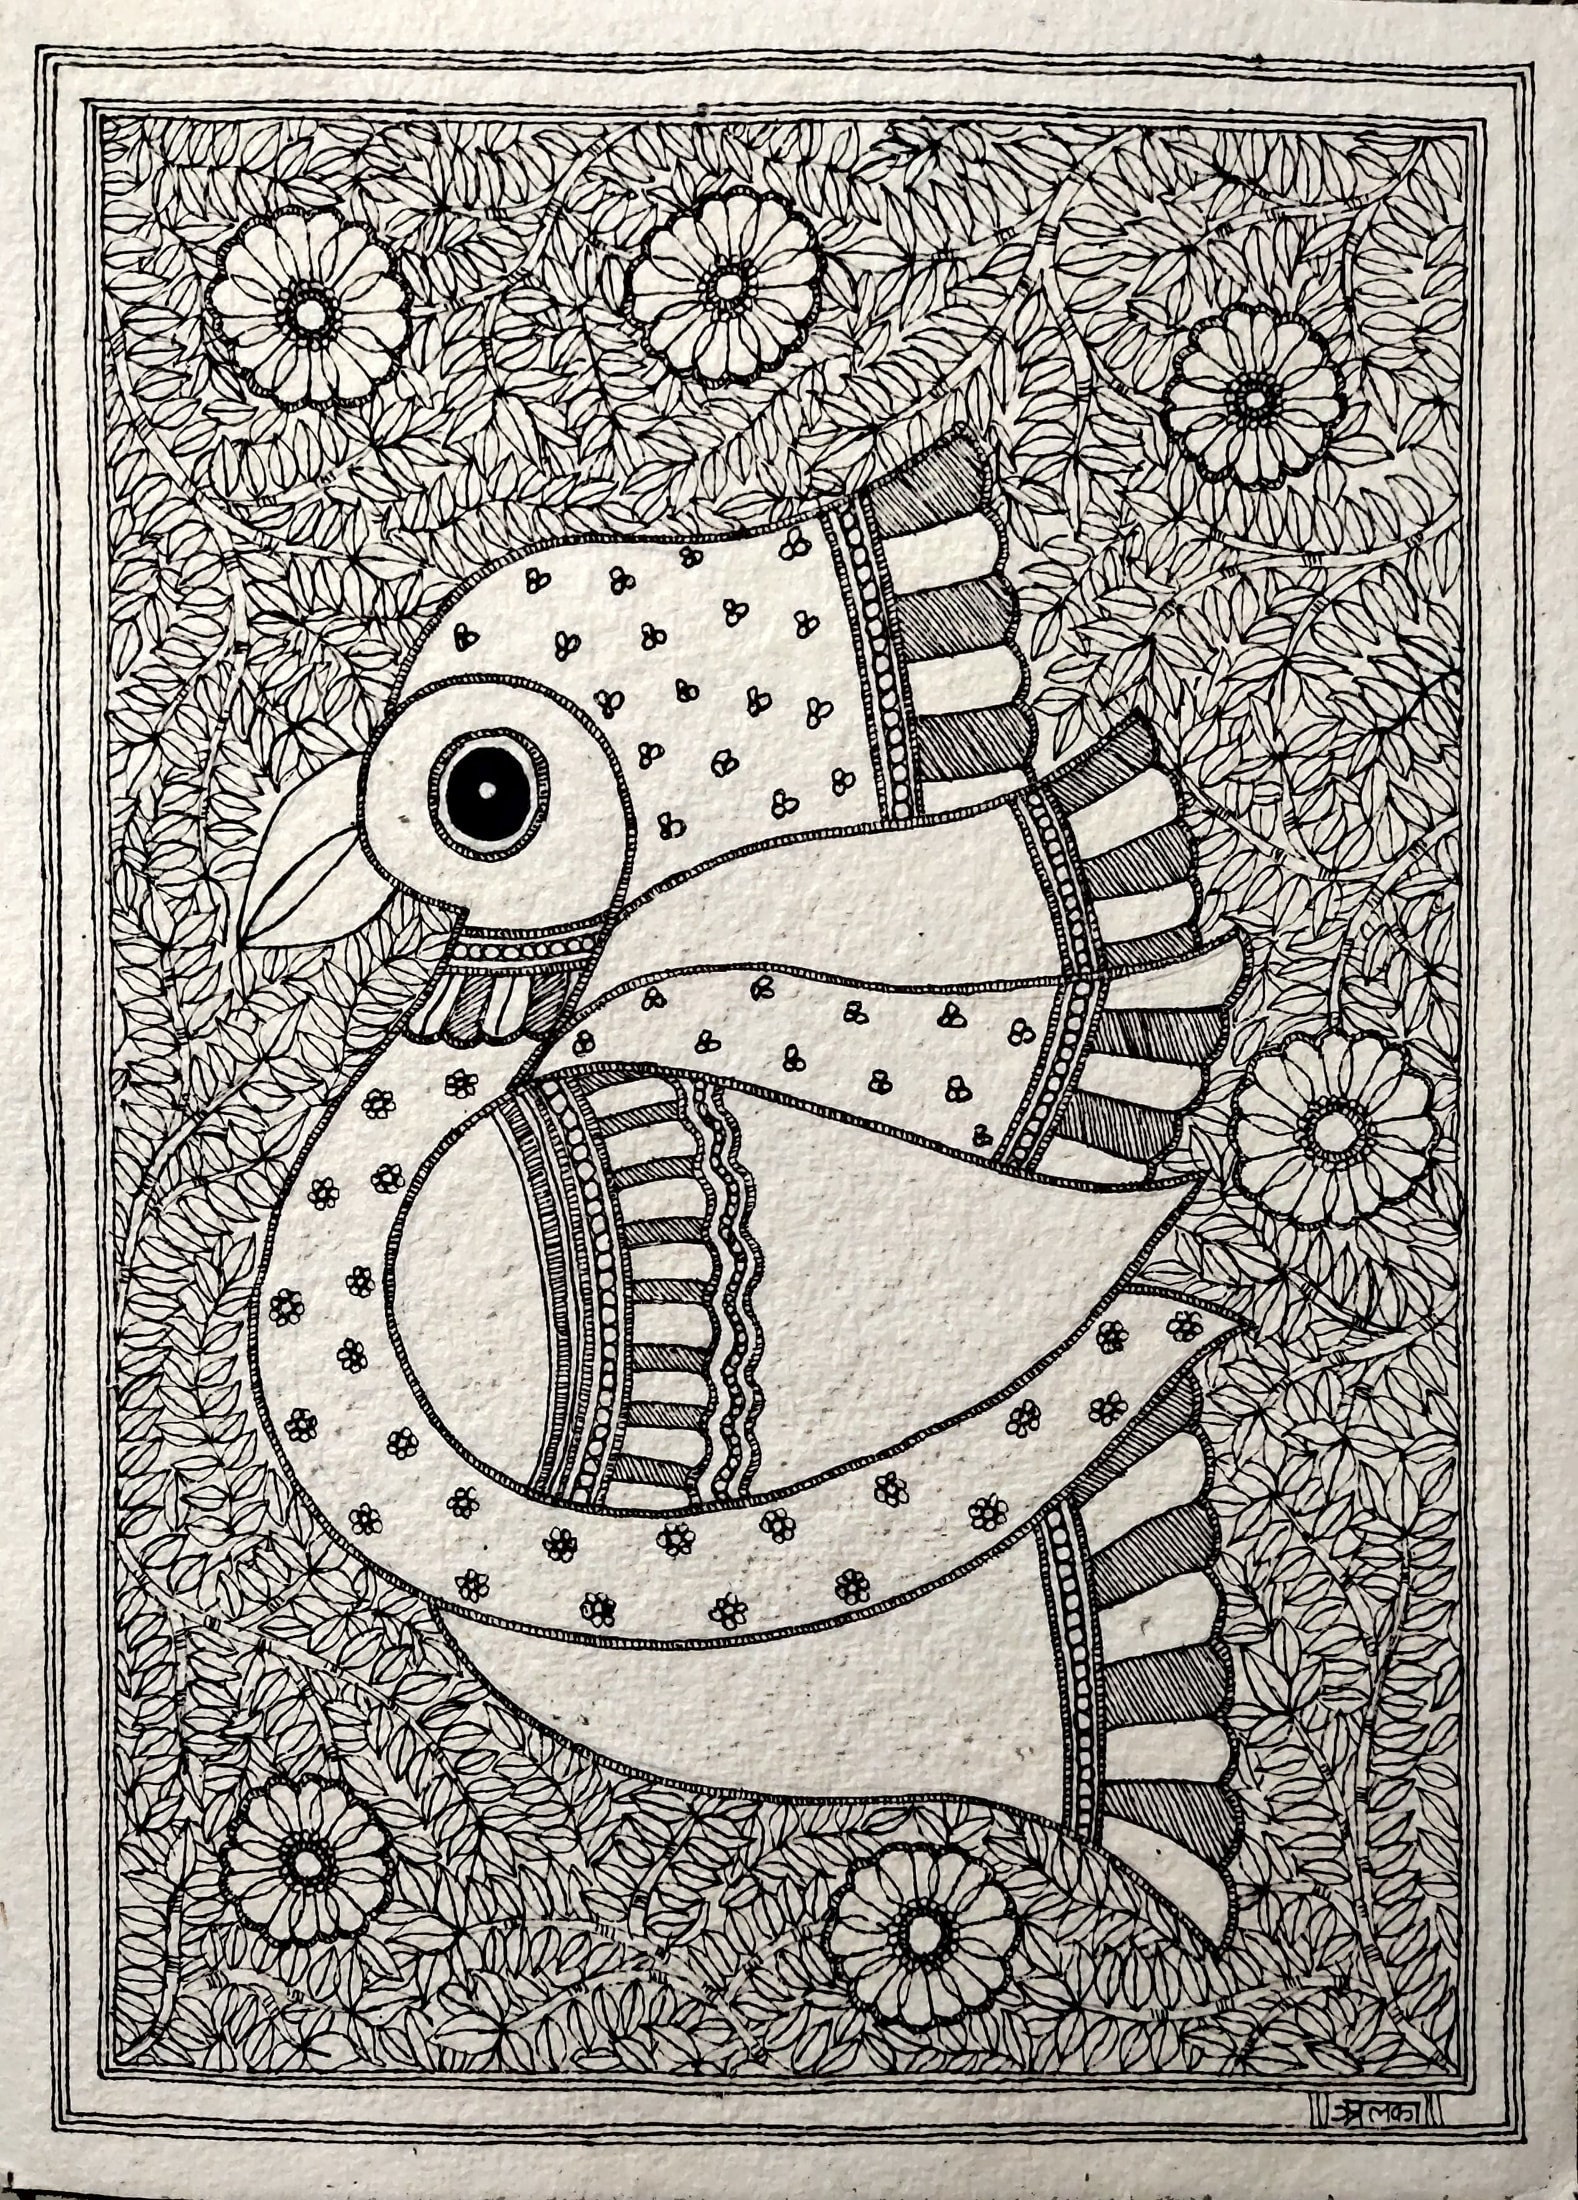 Make Madhubani Paintings with Textile Designing Techniques